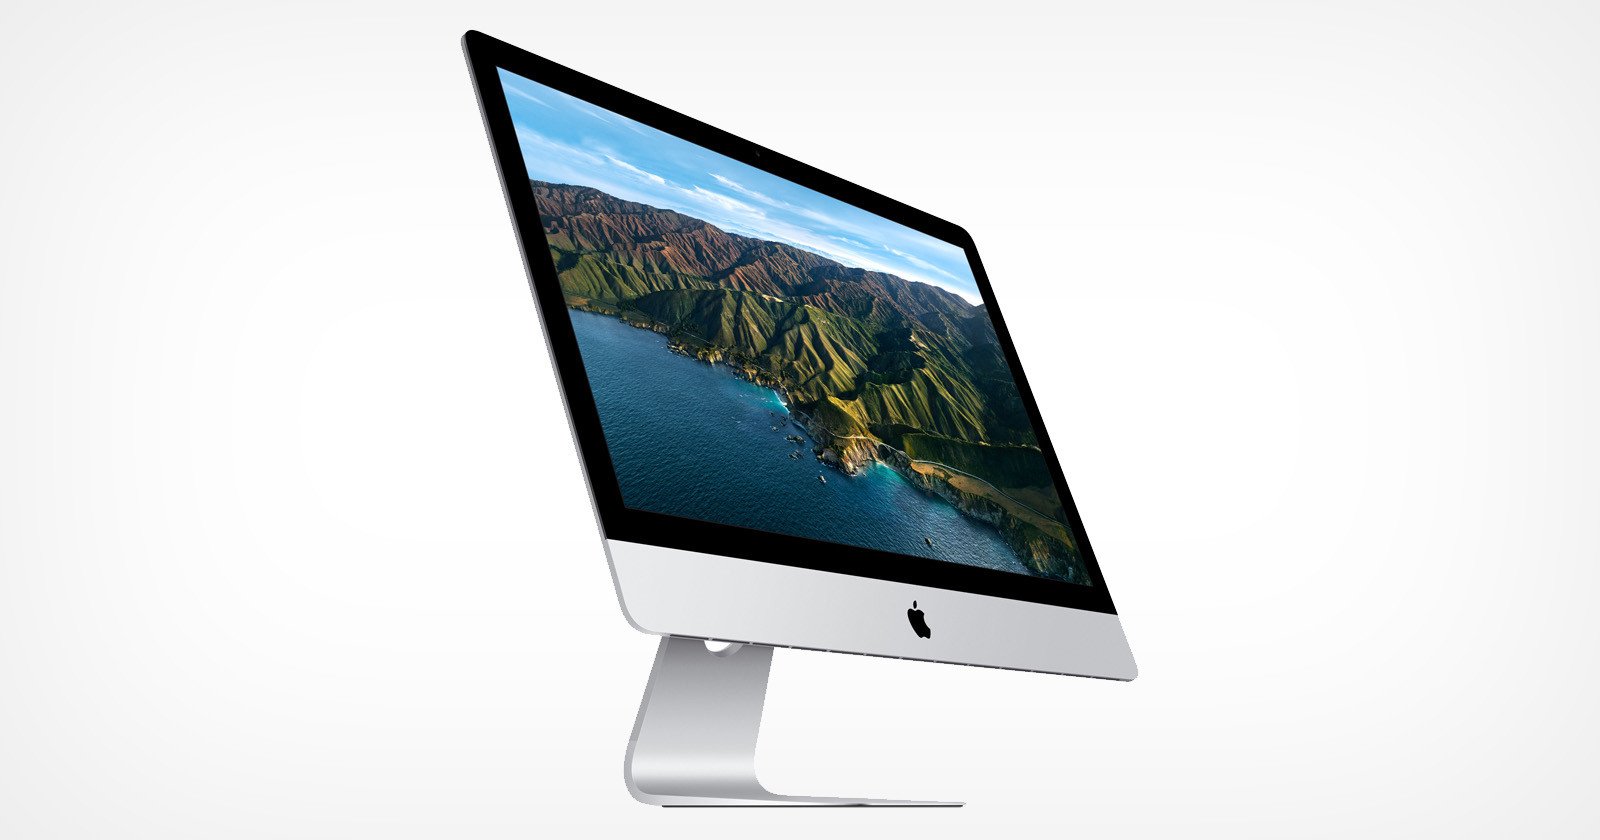 Apple Has Discontinued the 27-inch iMac